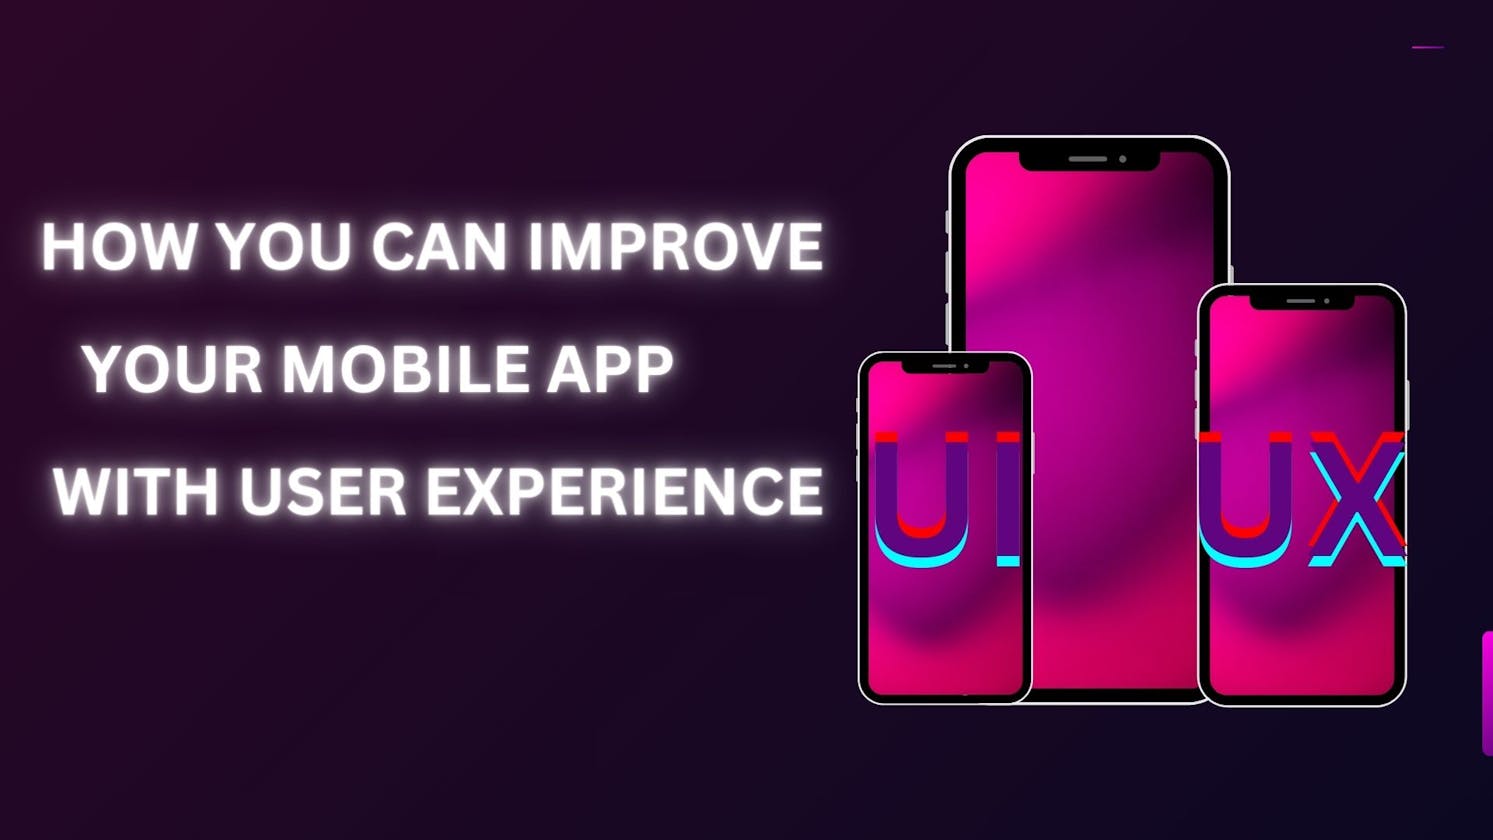 How can you improve your mobile app with user experience?